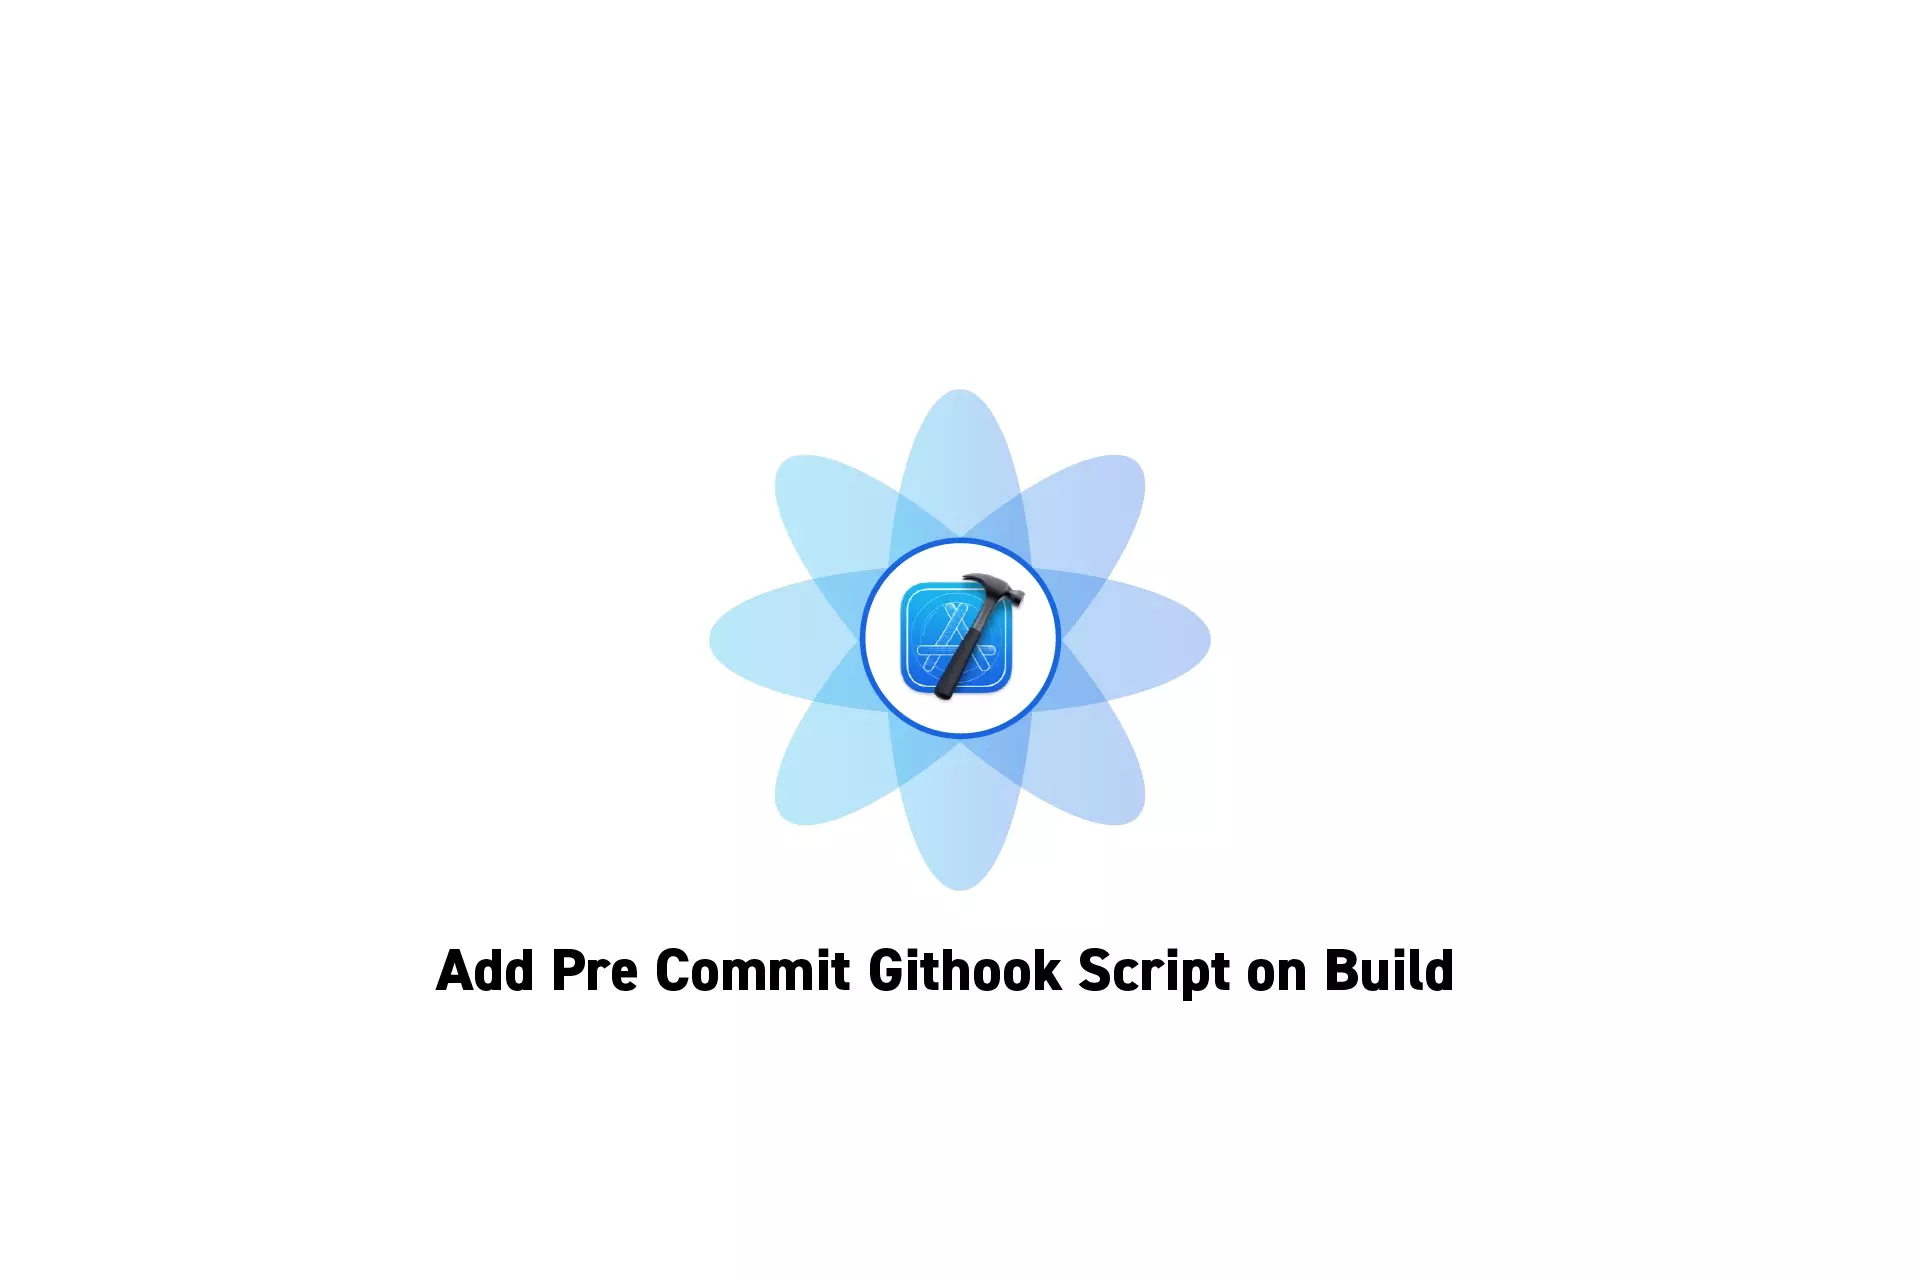 A flower that represents Xcode with the text "Add Pre Commit Githook Script on Build" beneath it.